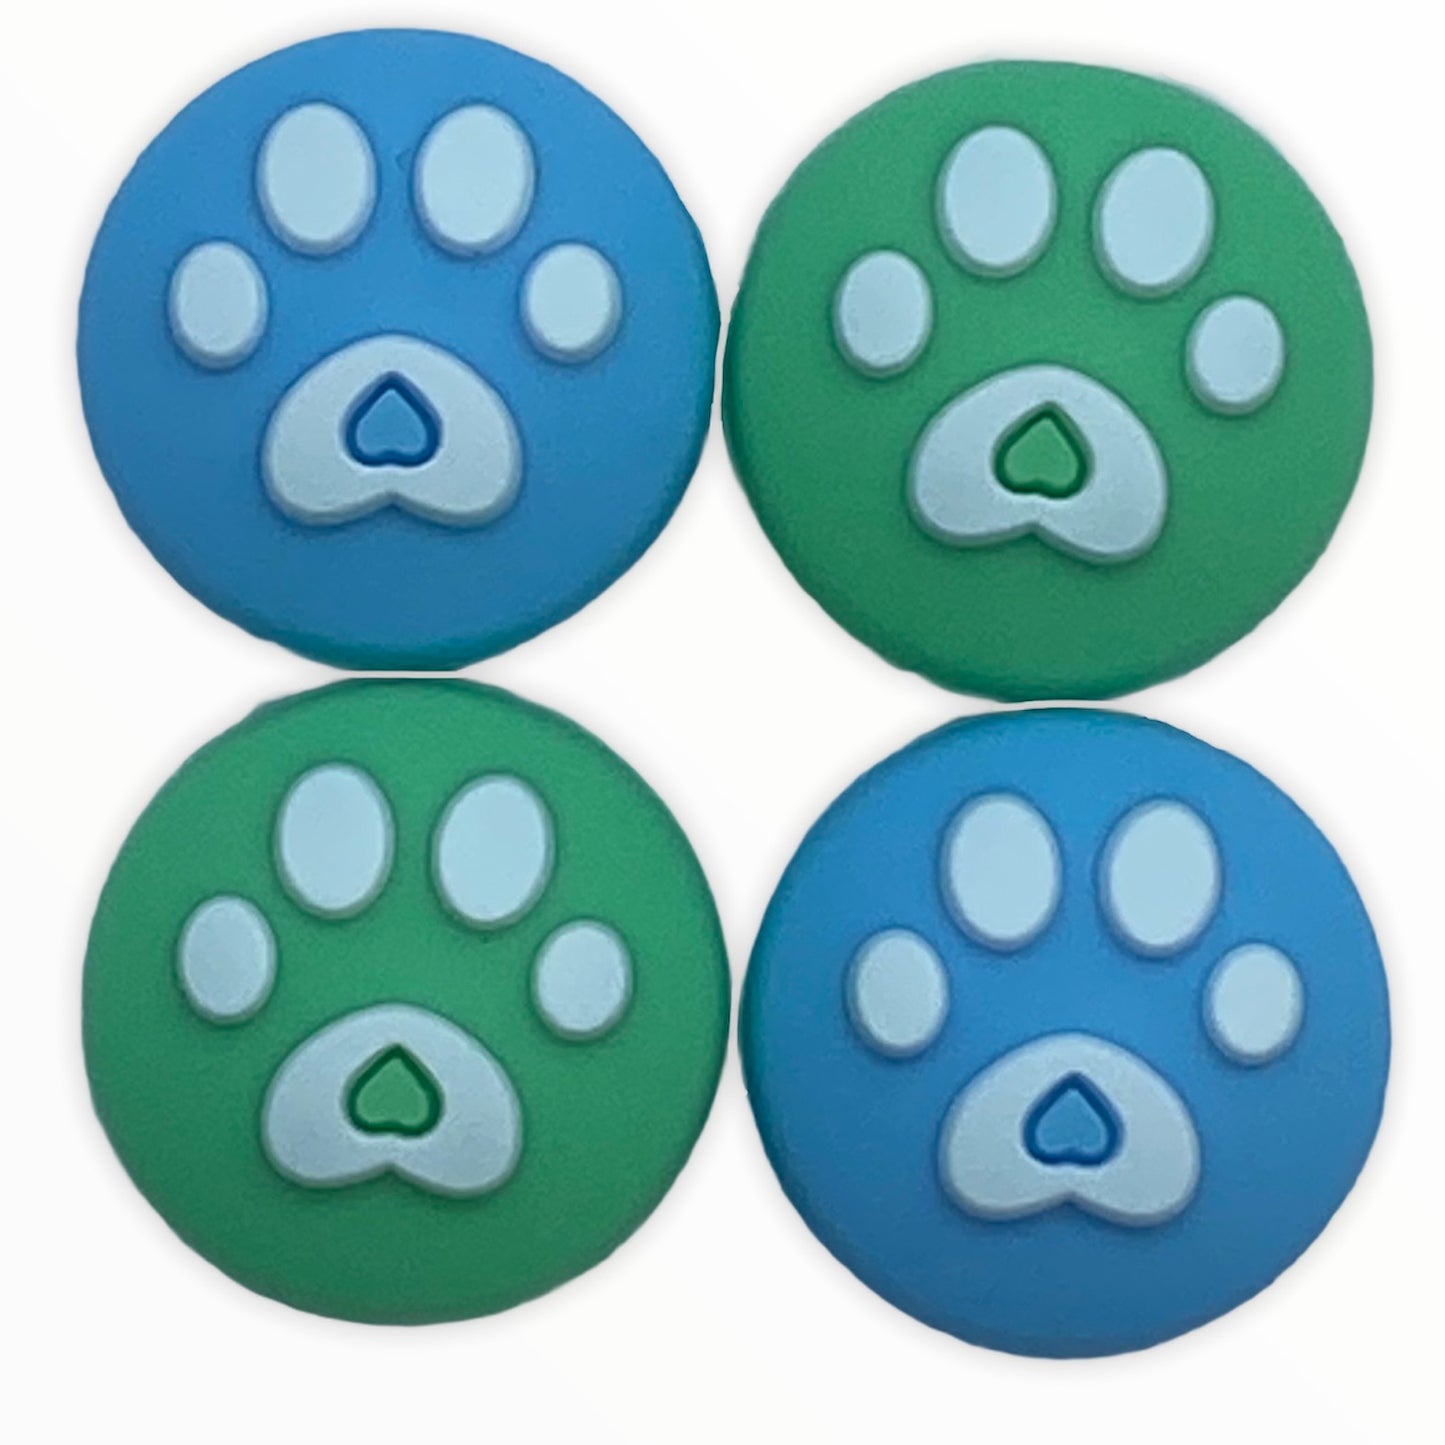 JenDore Green & Blue 4Pcs Paw Silicone Thumb Grip Caps for Nintendo Switch